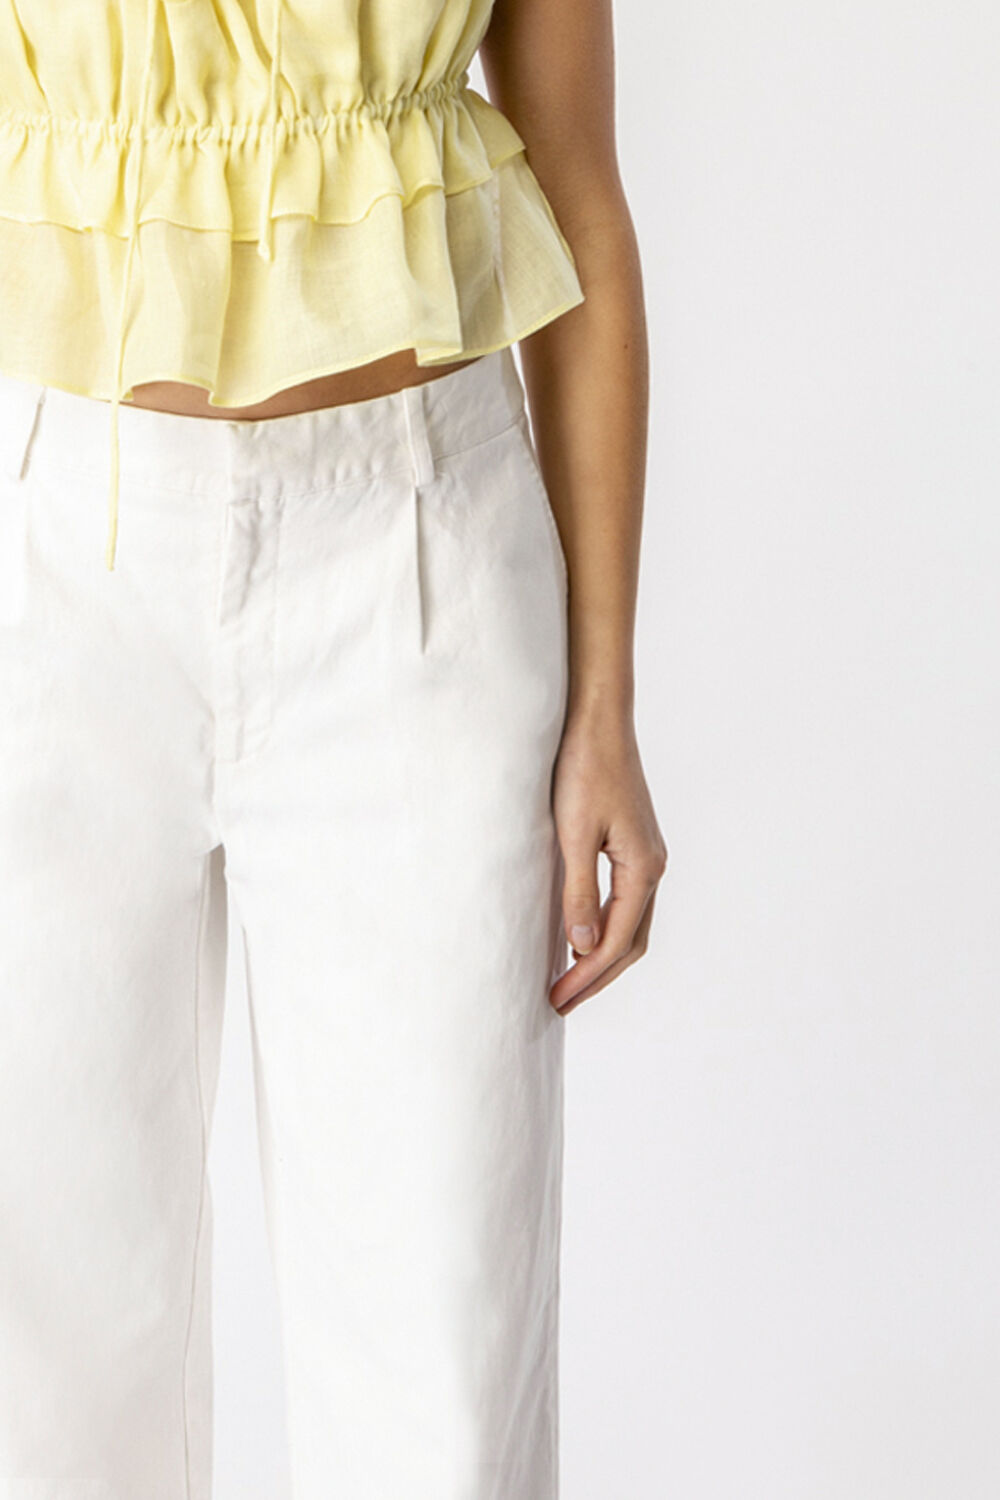 LOW RISE HIPSTER PANT in colour CLOUD DANCER